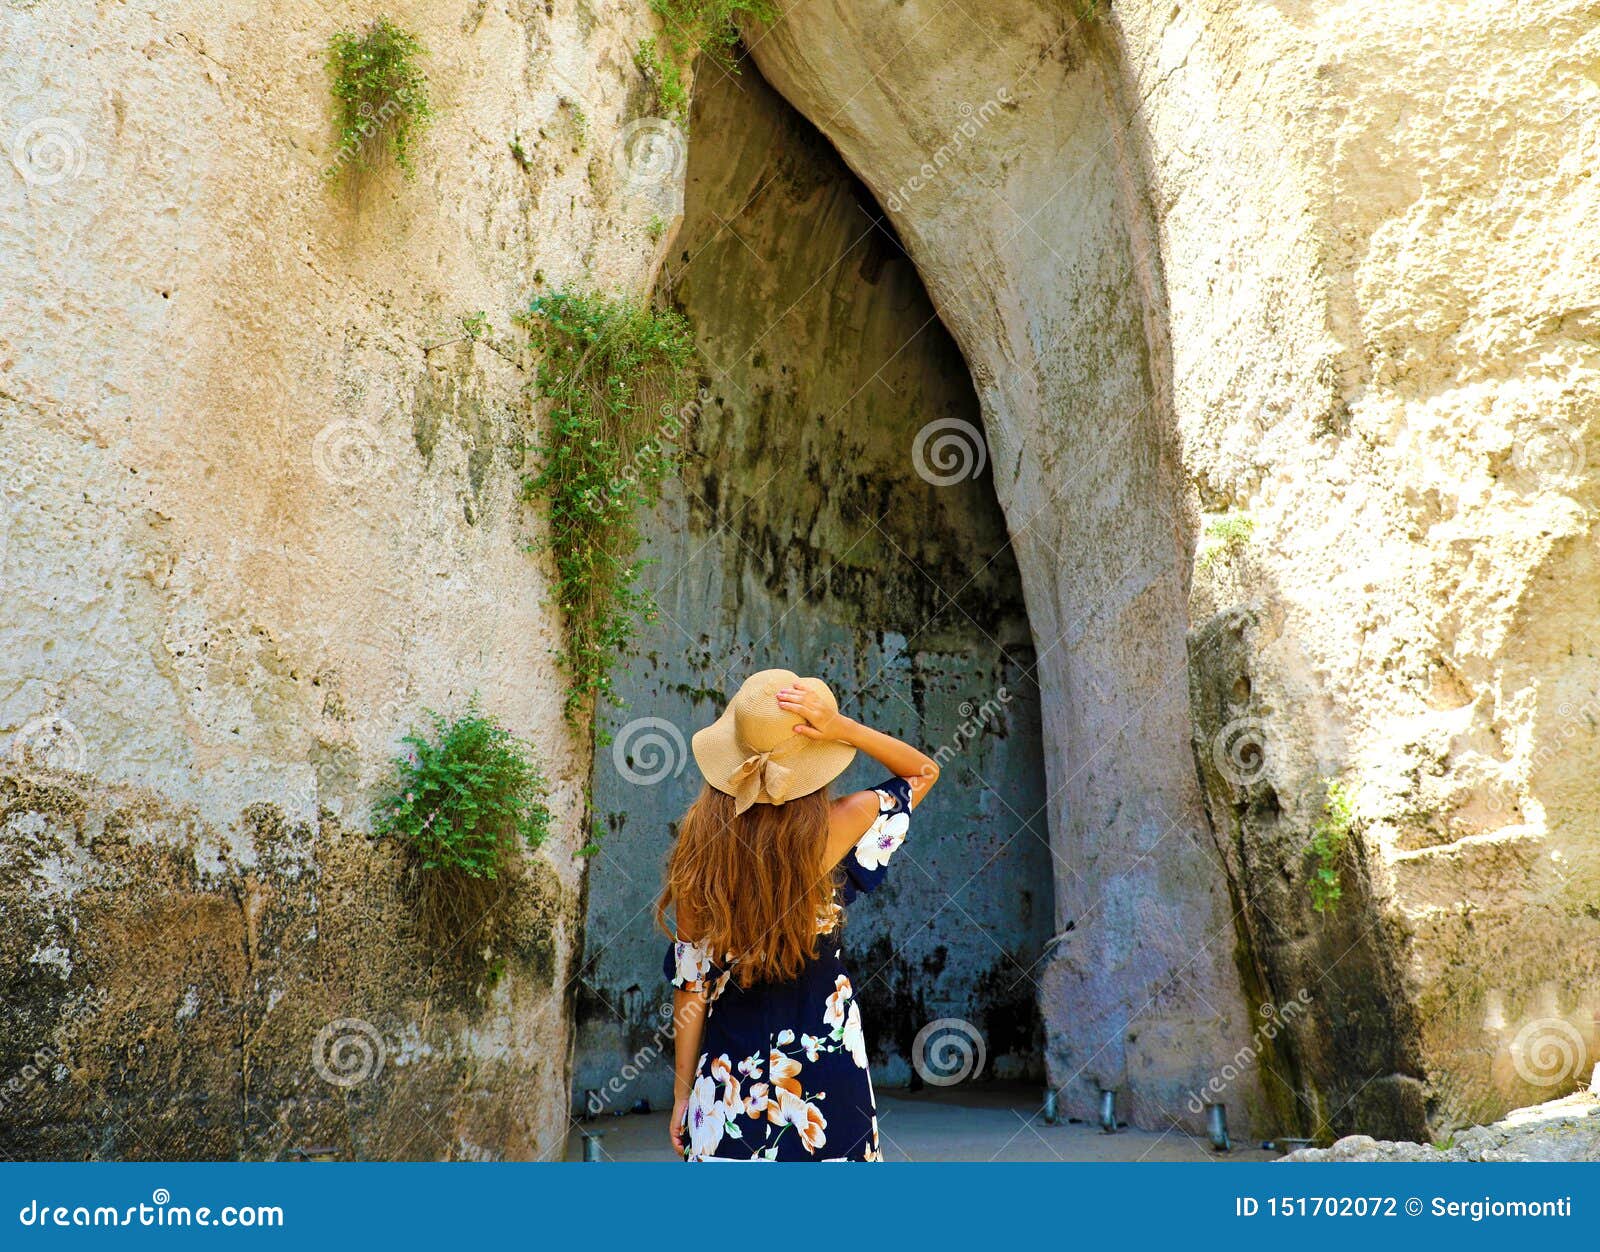 back view of beautiful woman comes into the ear of dionysius orecchio di dionisio in syracuse, sicily, italy